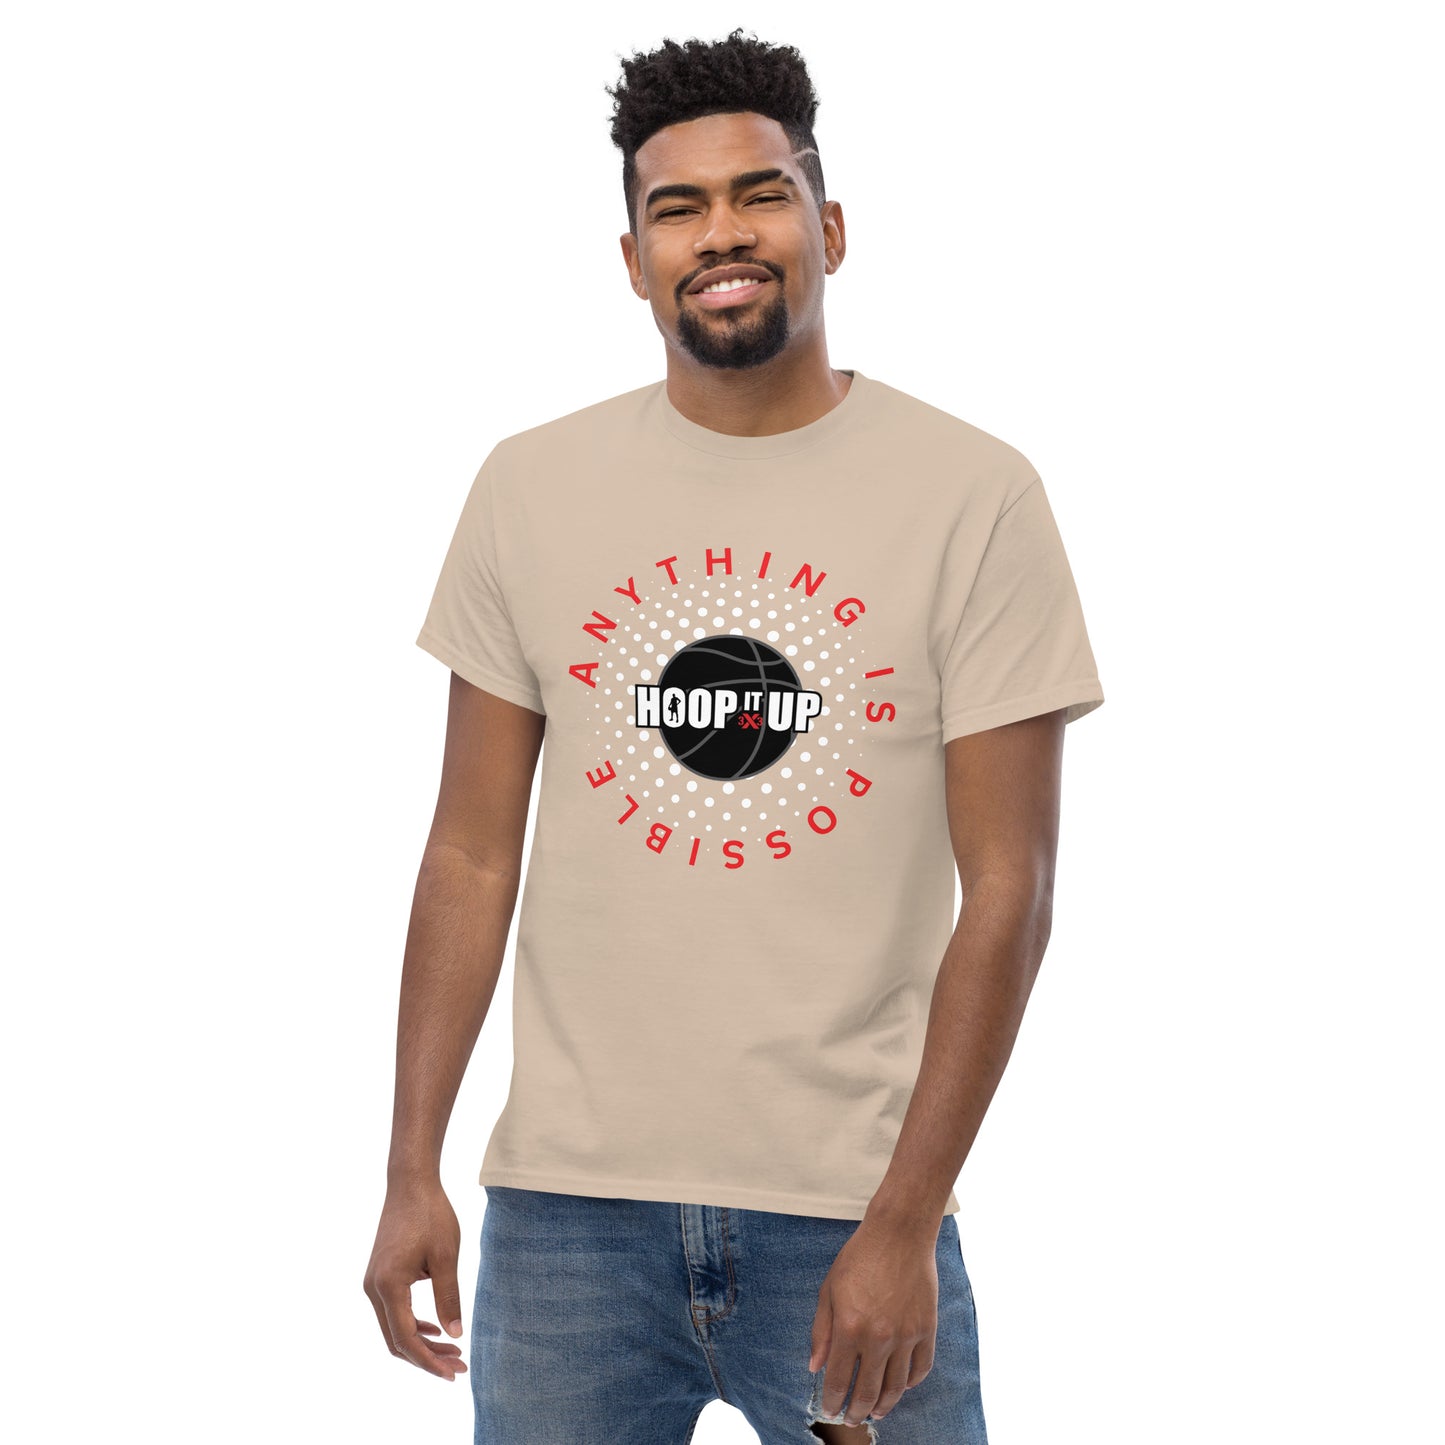 Anything is Possible tee